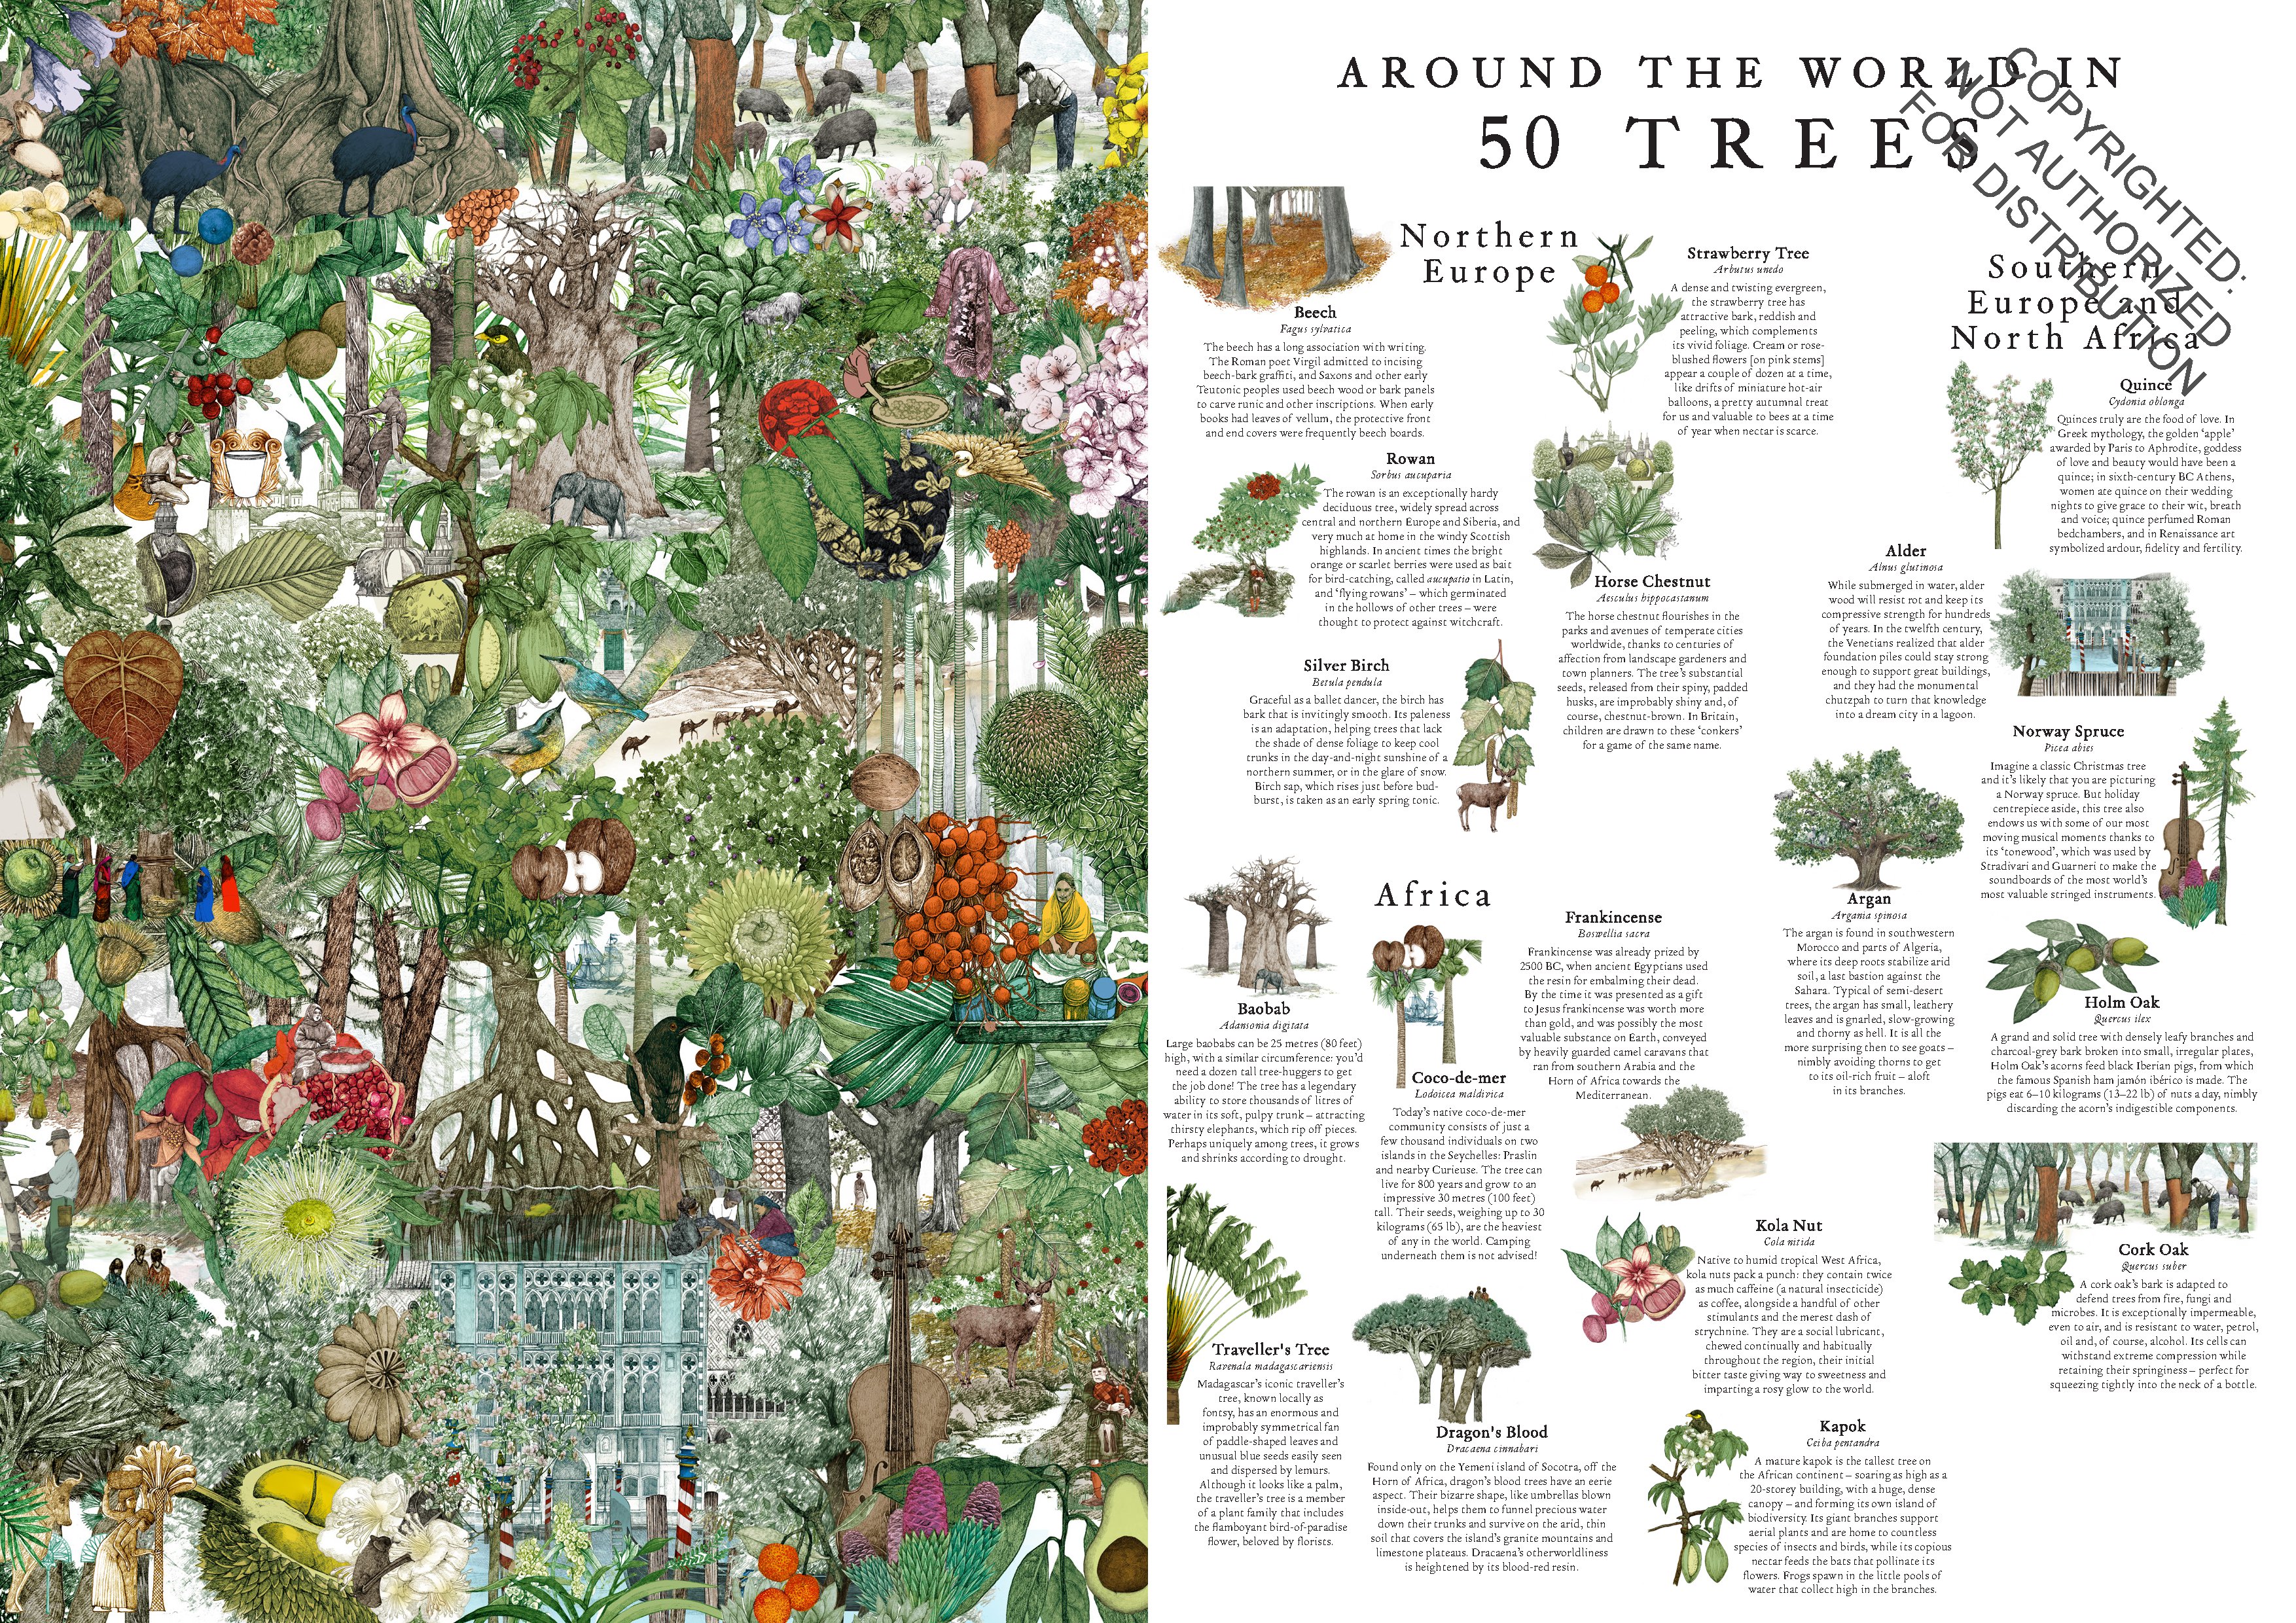 Around the World in 50 Trees 1000 Piece Puzzle